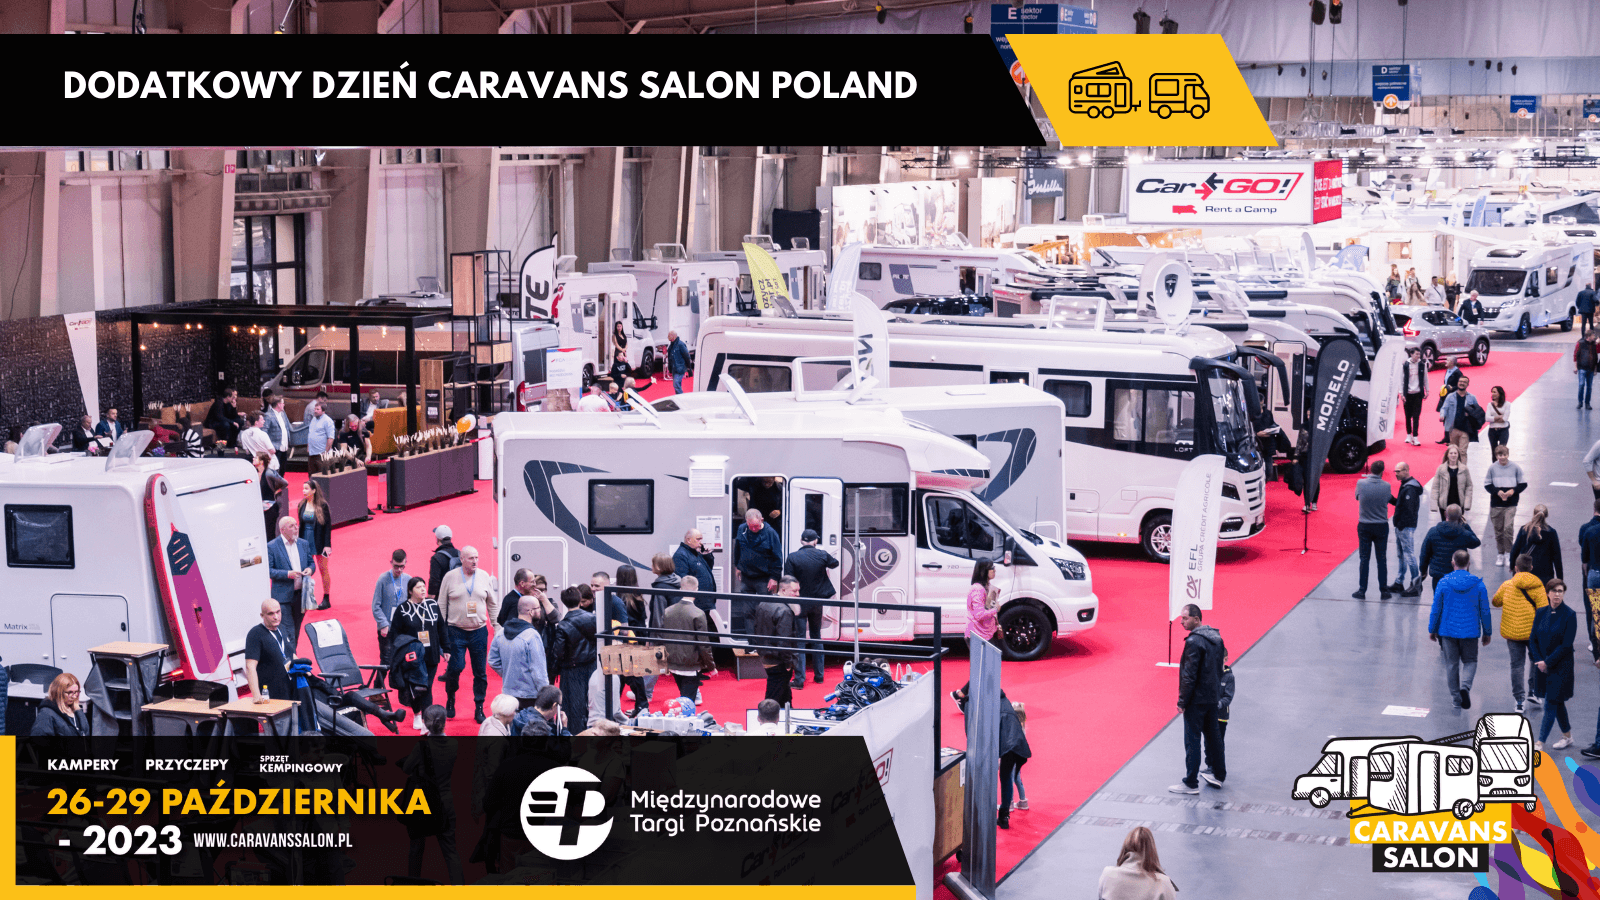 Caravans Salon 2023 in Poznań with an additional day for business – main image